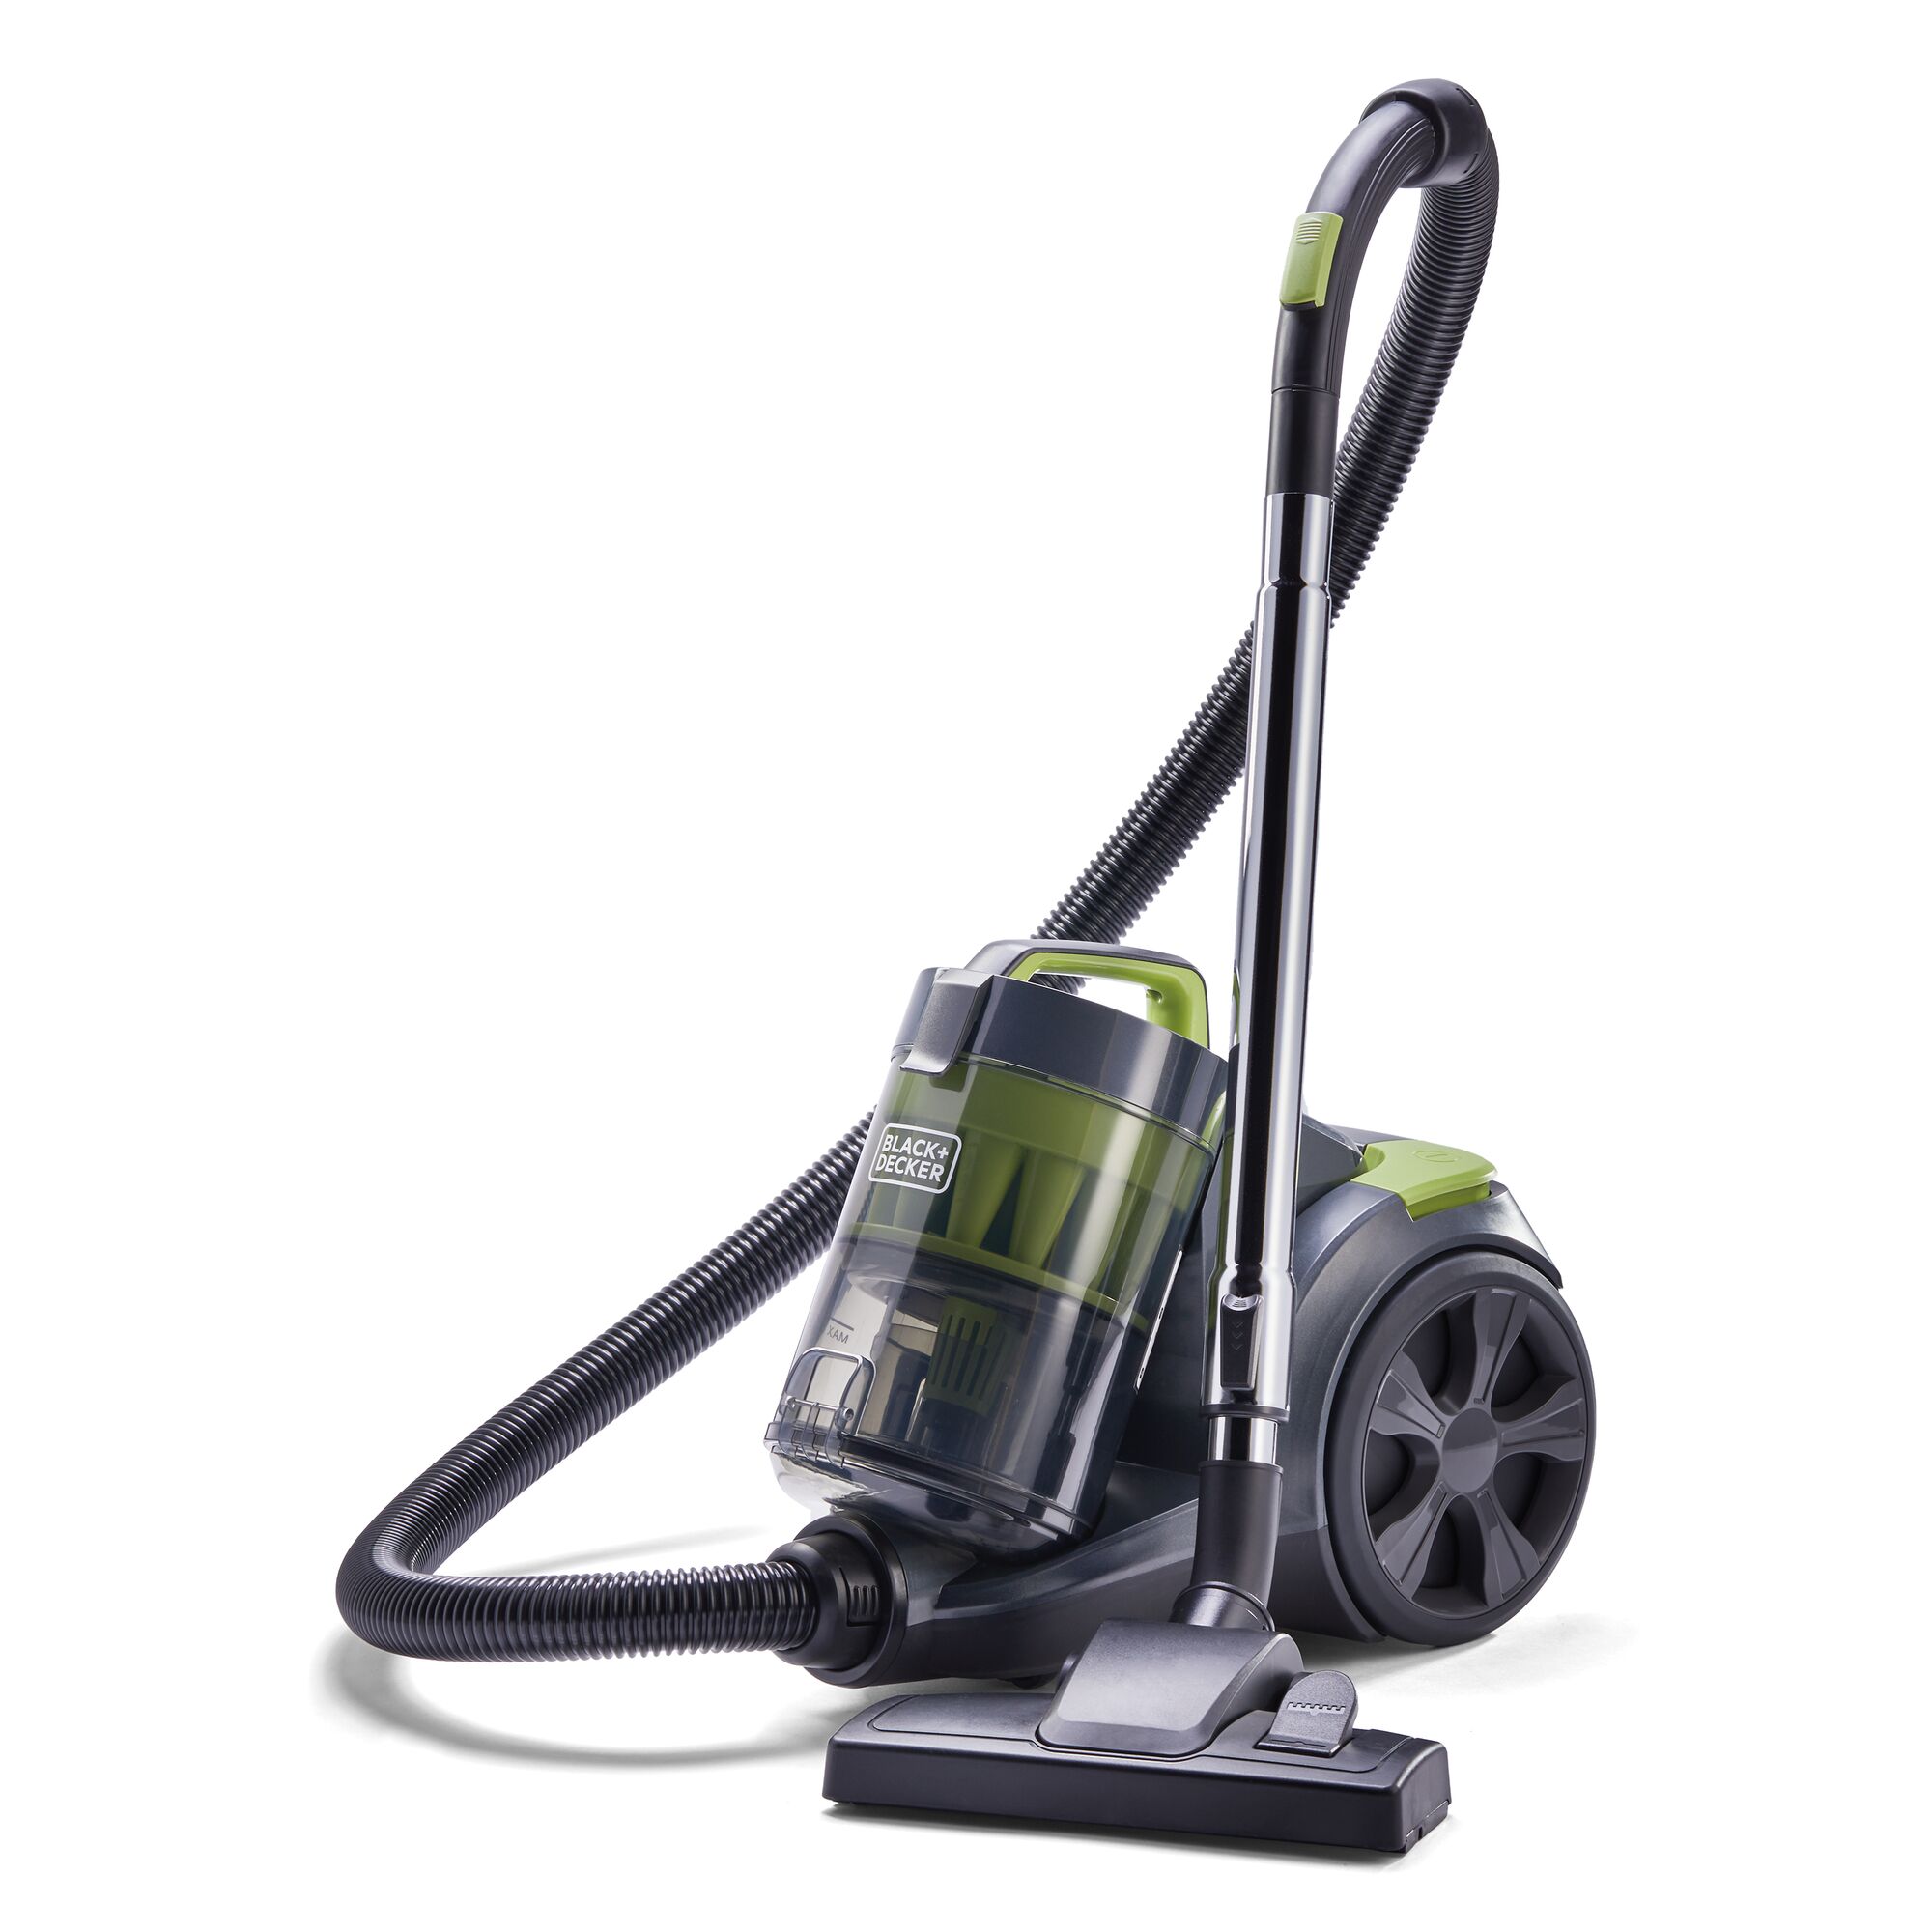 Bagless Multi-Cyclonic Canister Vacuum on a white background.